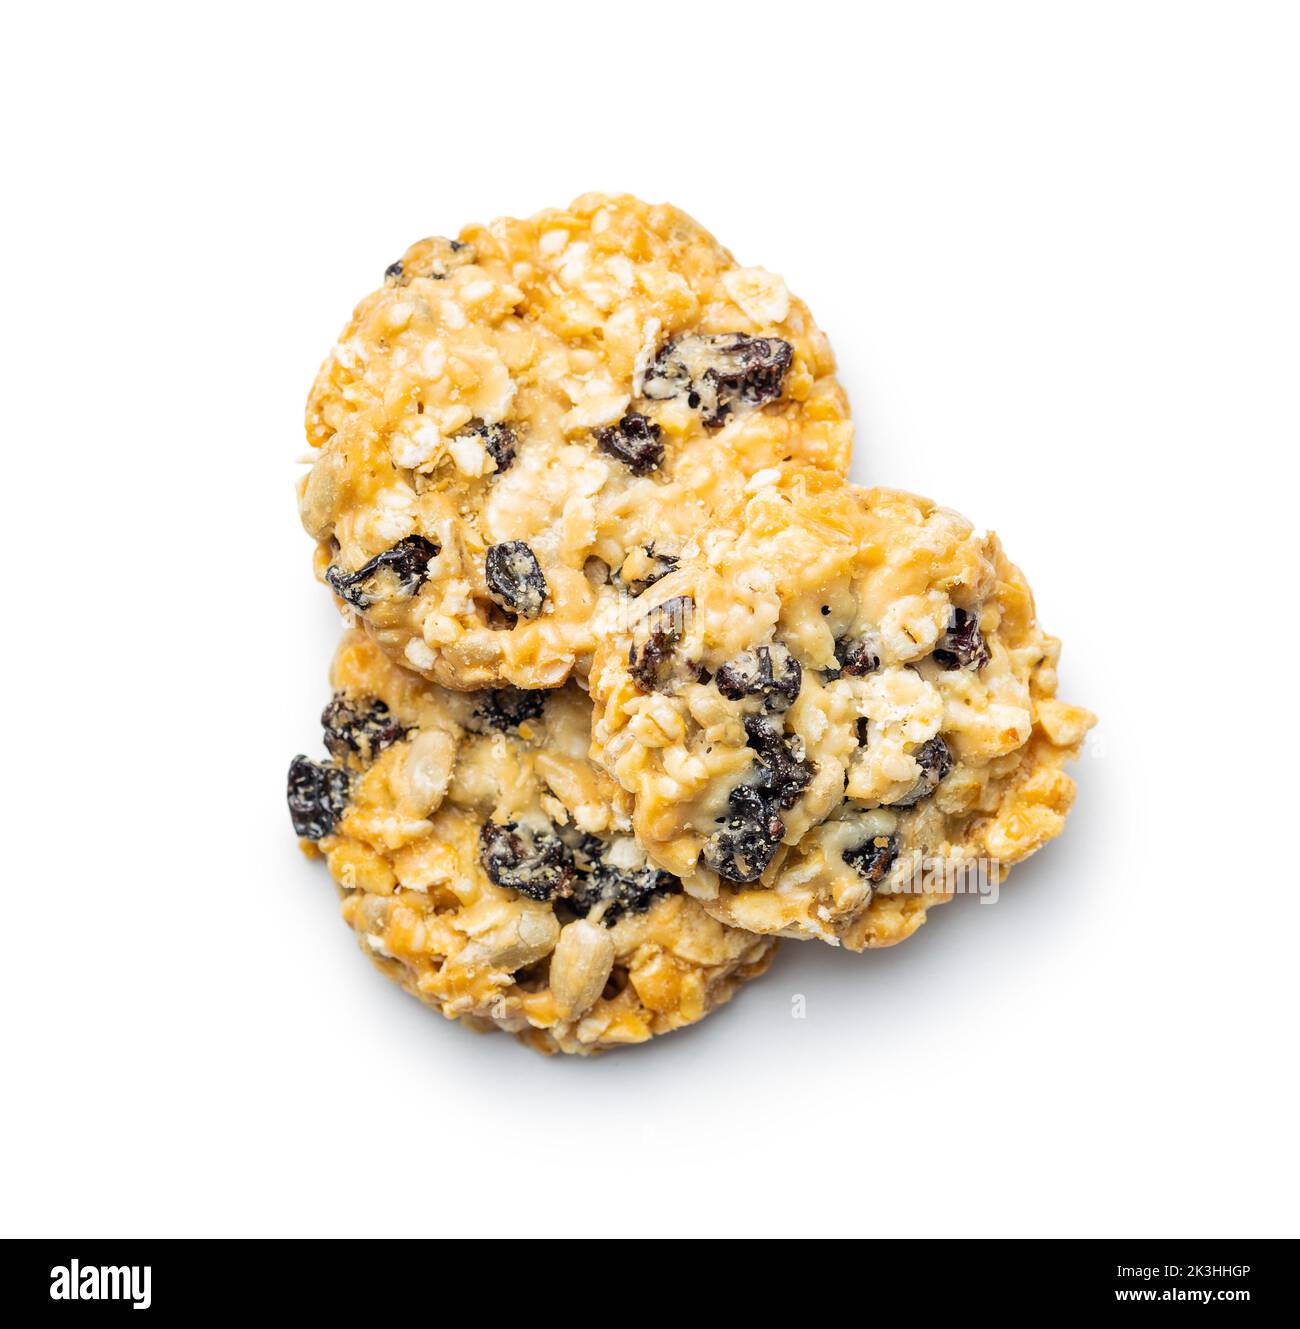 Wholegrain oat cookies. Cookies with oatmeal and raisins isolated on the white table. Stock Photo